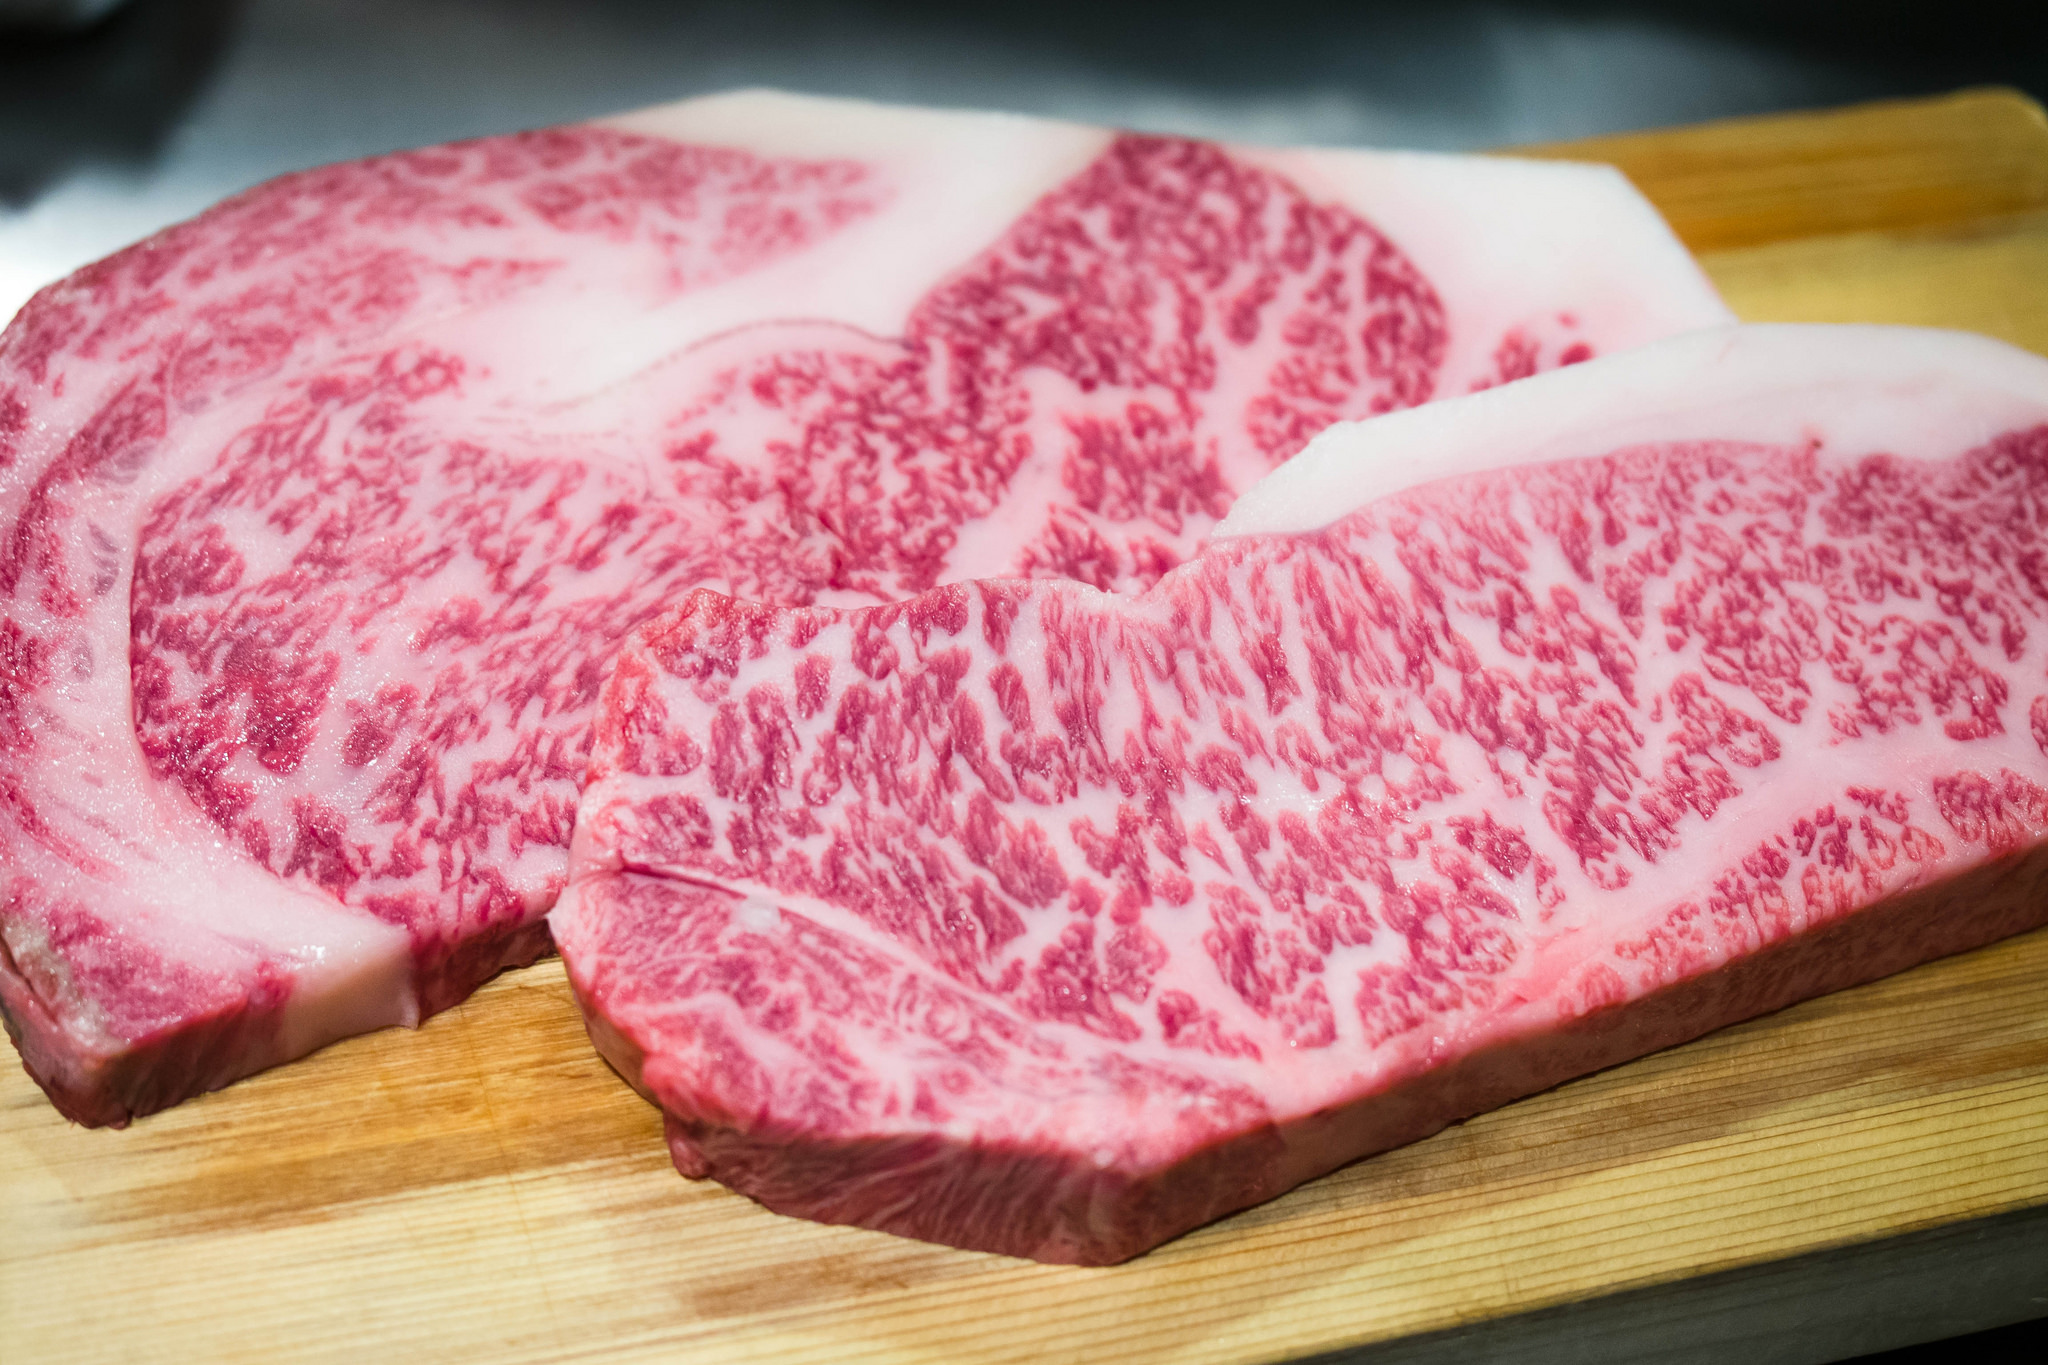 A producer of Wagyu beef has licensed its cells to Just, in hopes of being part of cell-cultured Wagyu one day. Credit: Flickr / Allan Salvador, December 2018